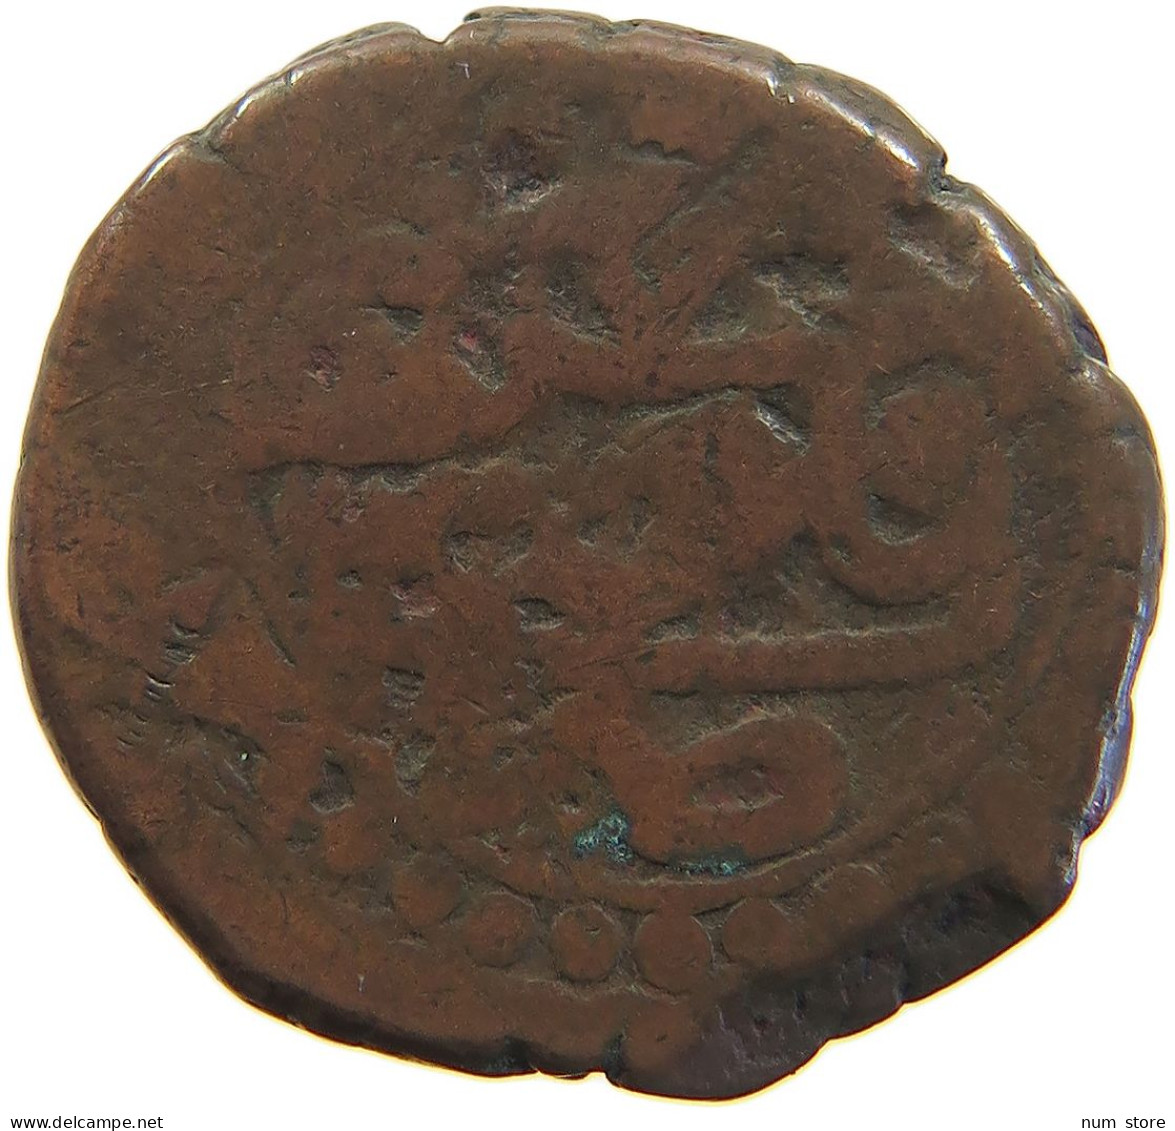 ISLAMIC FALUS FALS PEACOCK RIGHT FIGURATIVE COINAGES IRAN / PERSIA / AFGHANISTAN 20MM 6.5G #t034 0105 - Iran